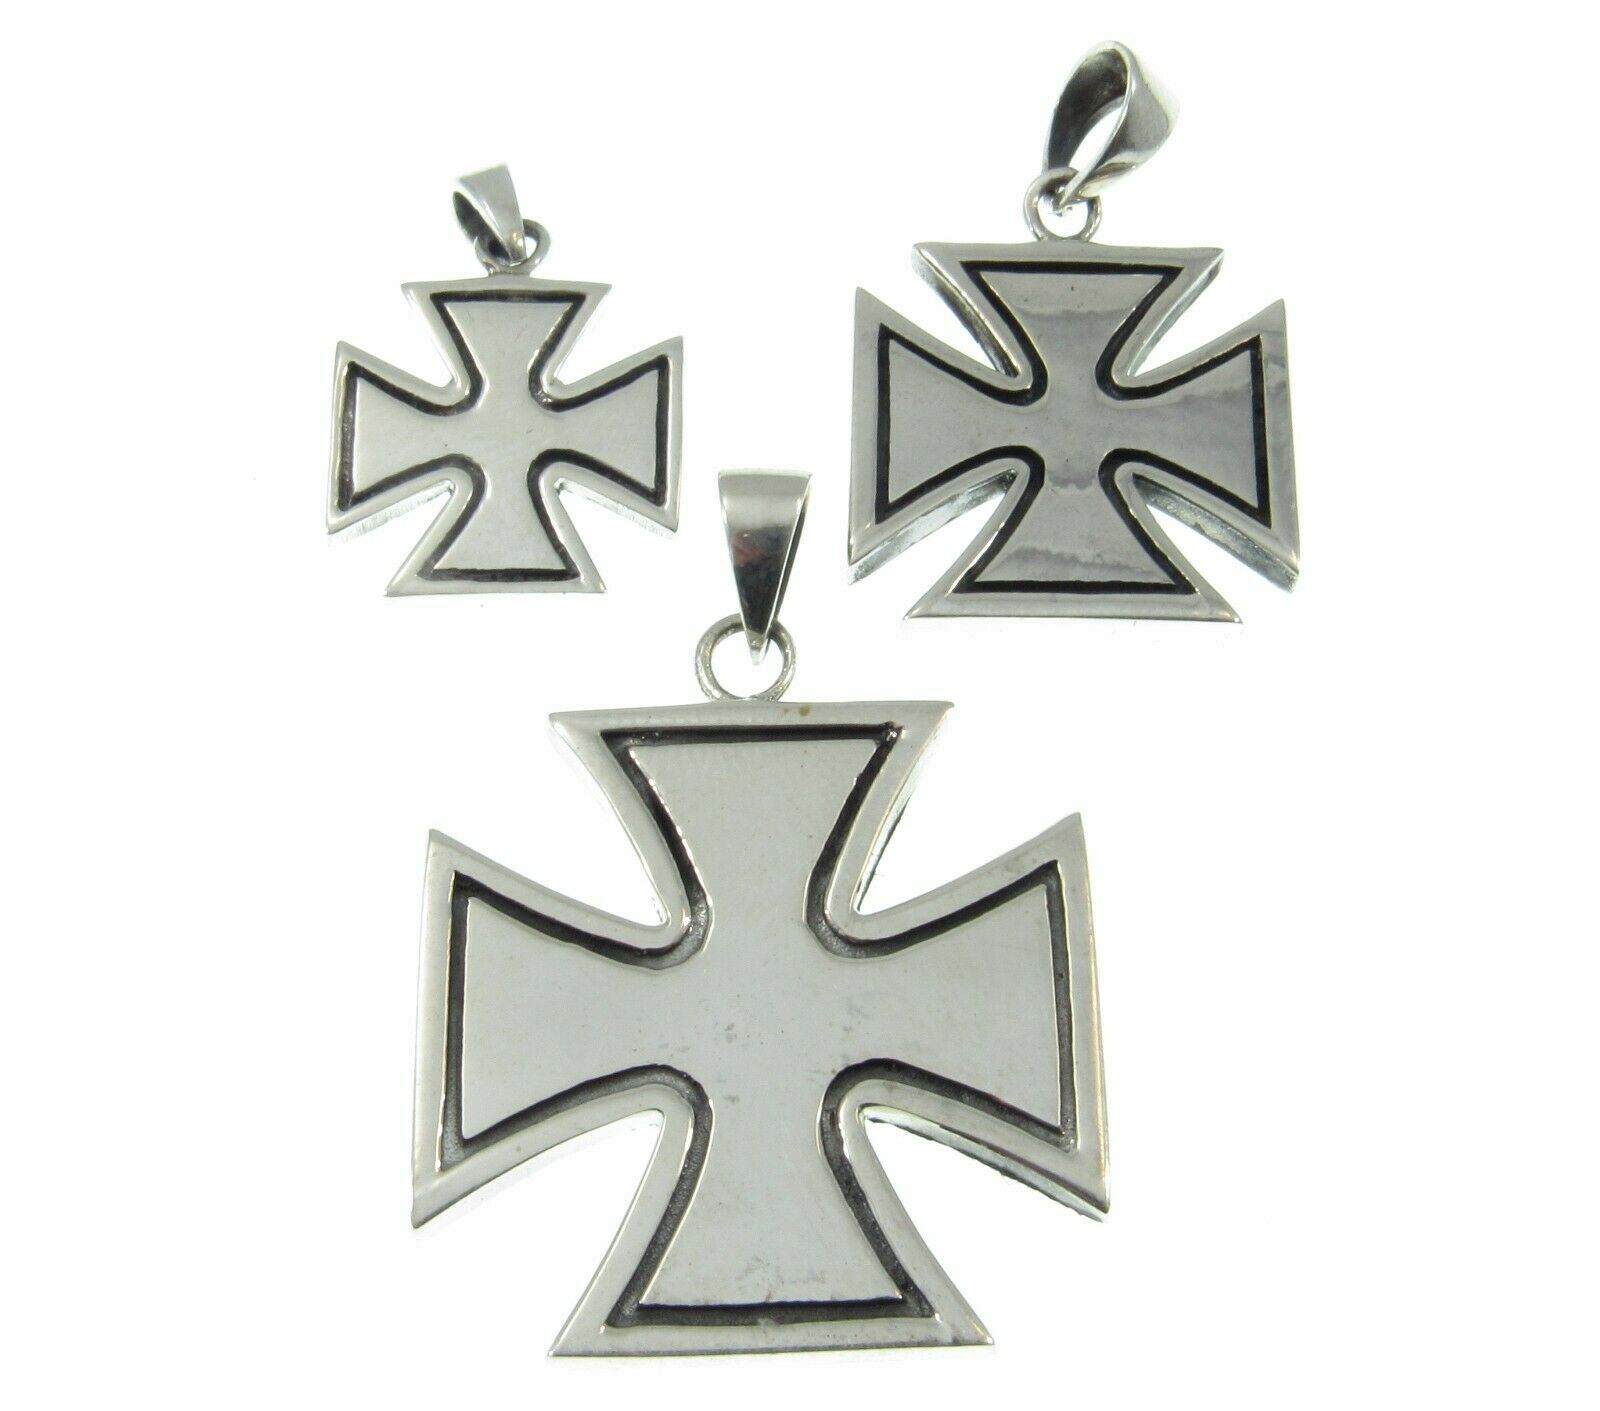 Handcrafted Solid 925 Sterling Silver Iron Cross (Croix Pattee) Pendant